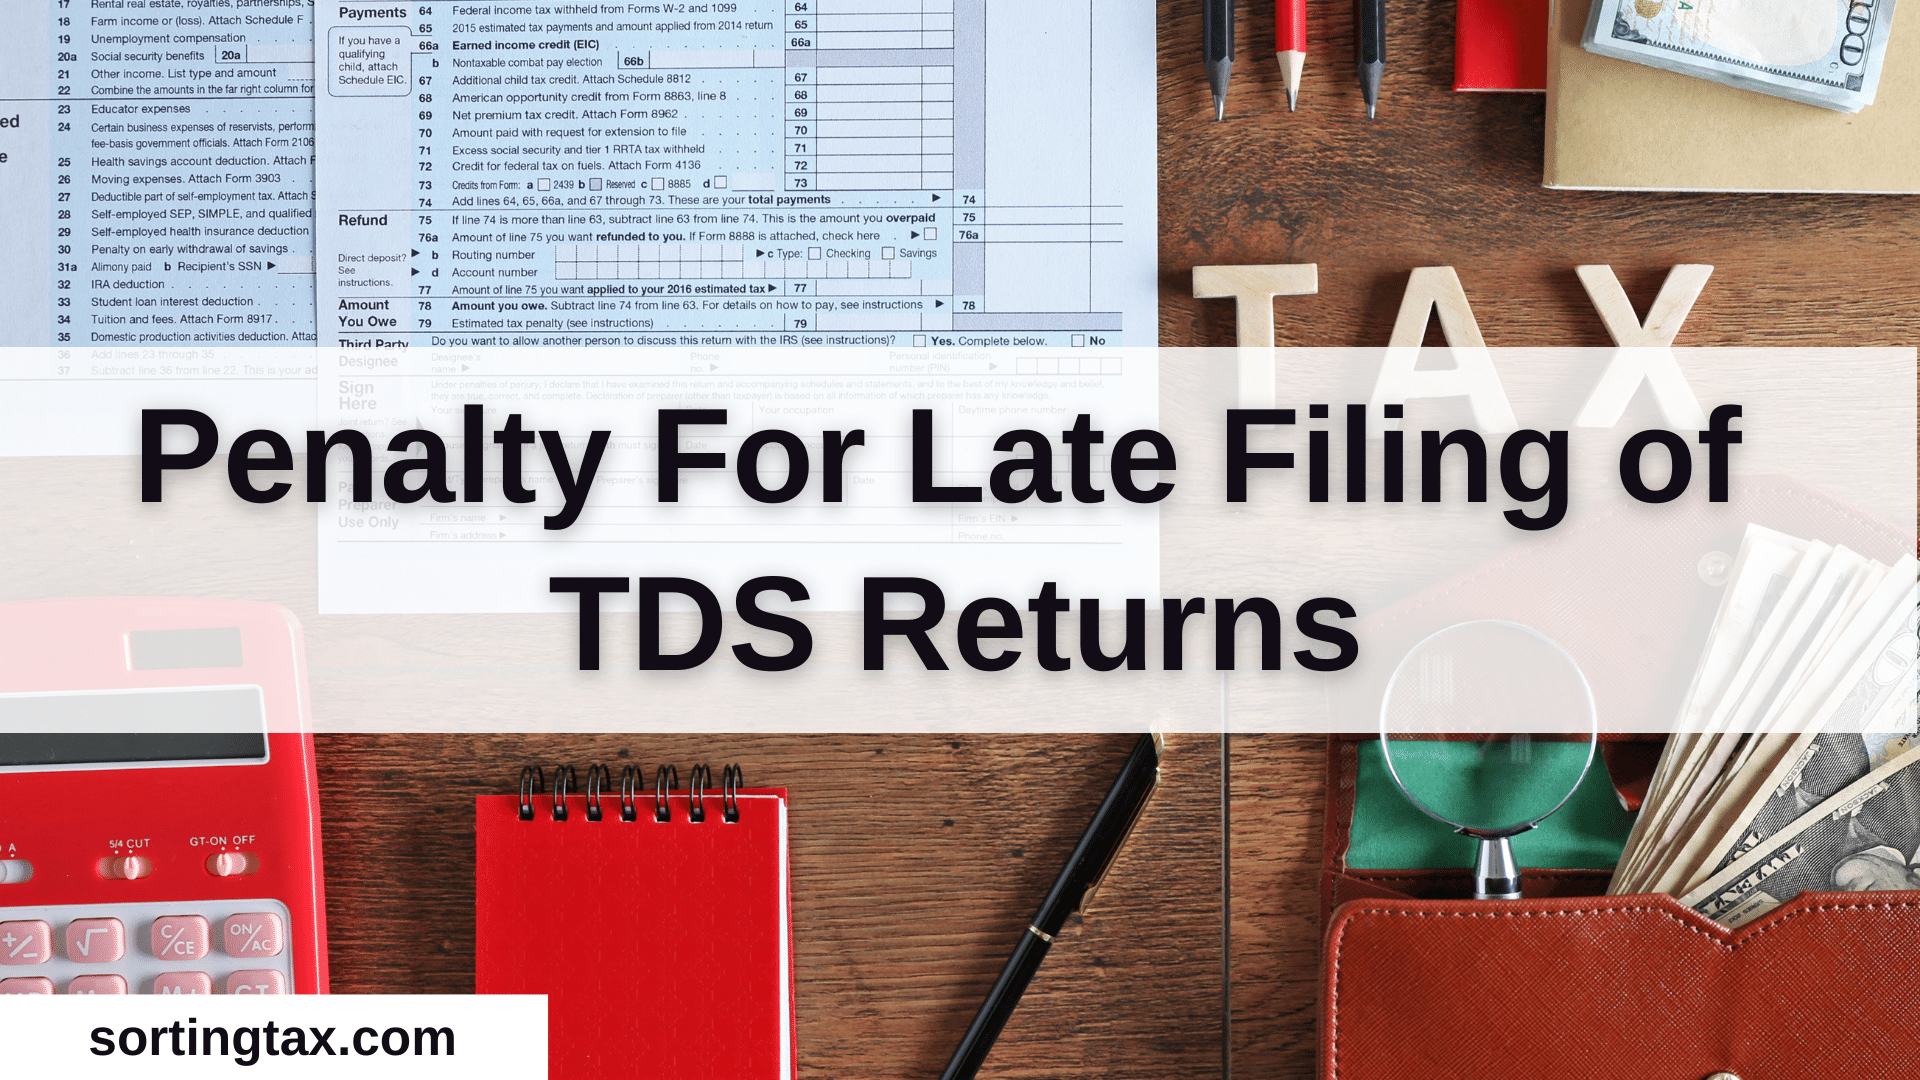 Penalty for late filing of TDS Returns